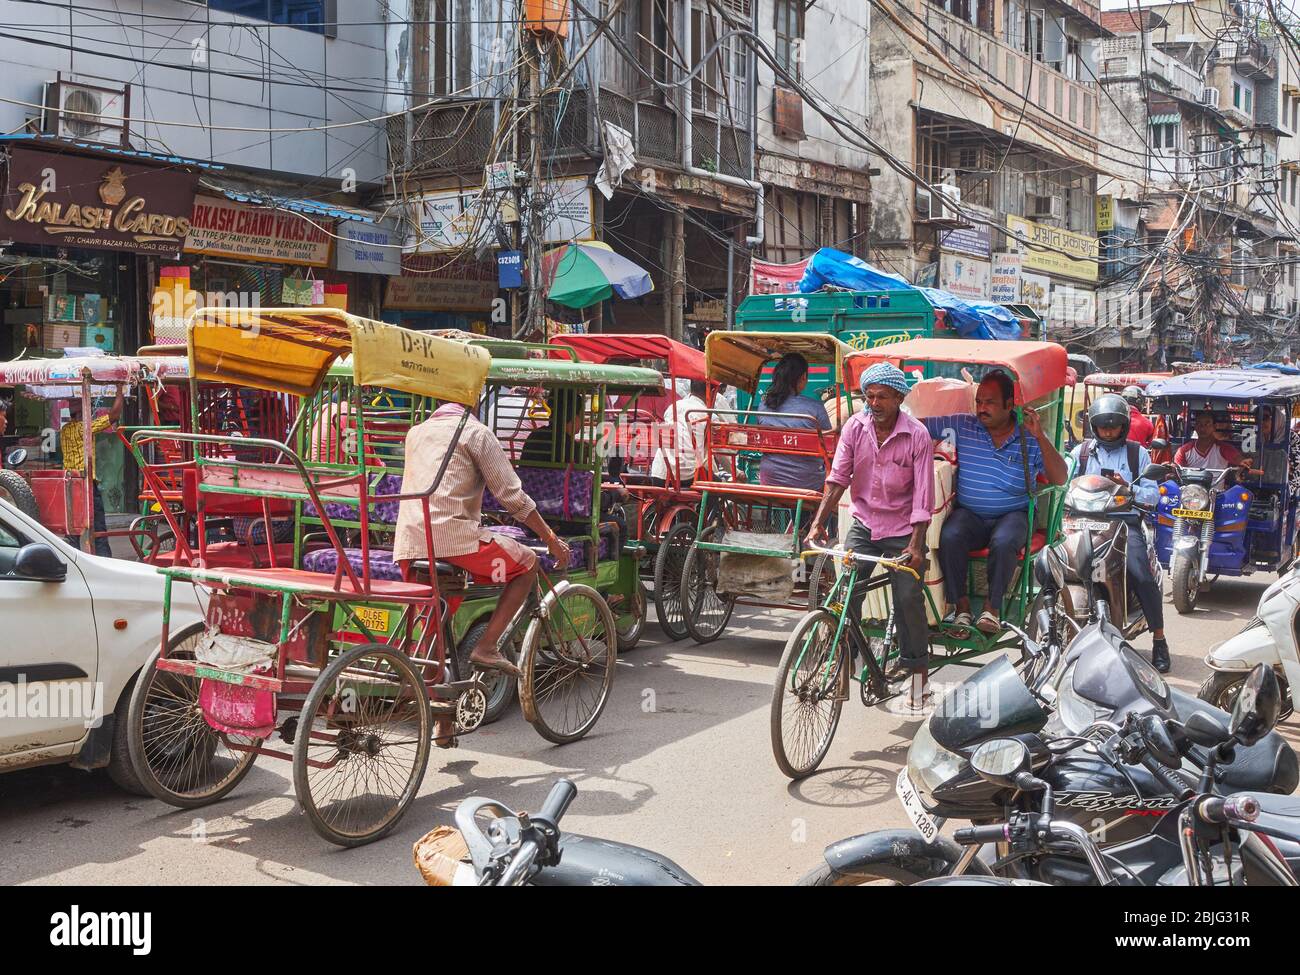 New Delhi / India - September 19, 2019: Transport congestion in Chandni Chowk, a busy shopping area in Old Delhi with bazaars and colorful narrow stre Stock Photo